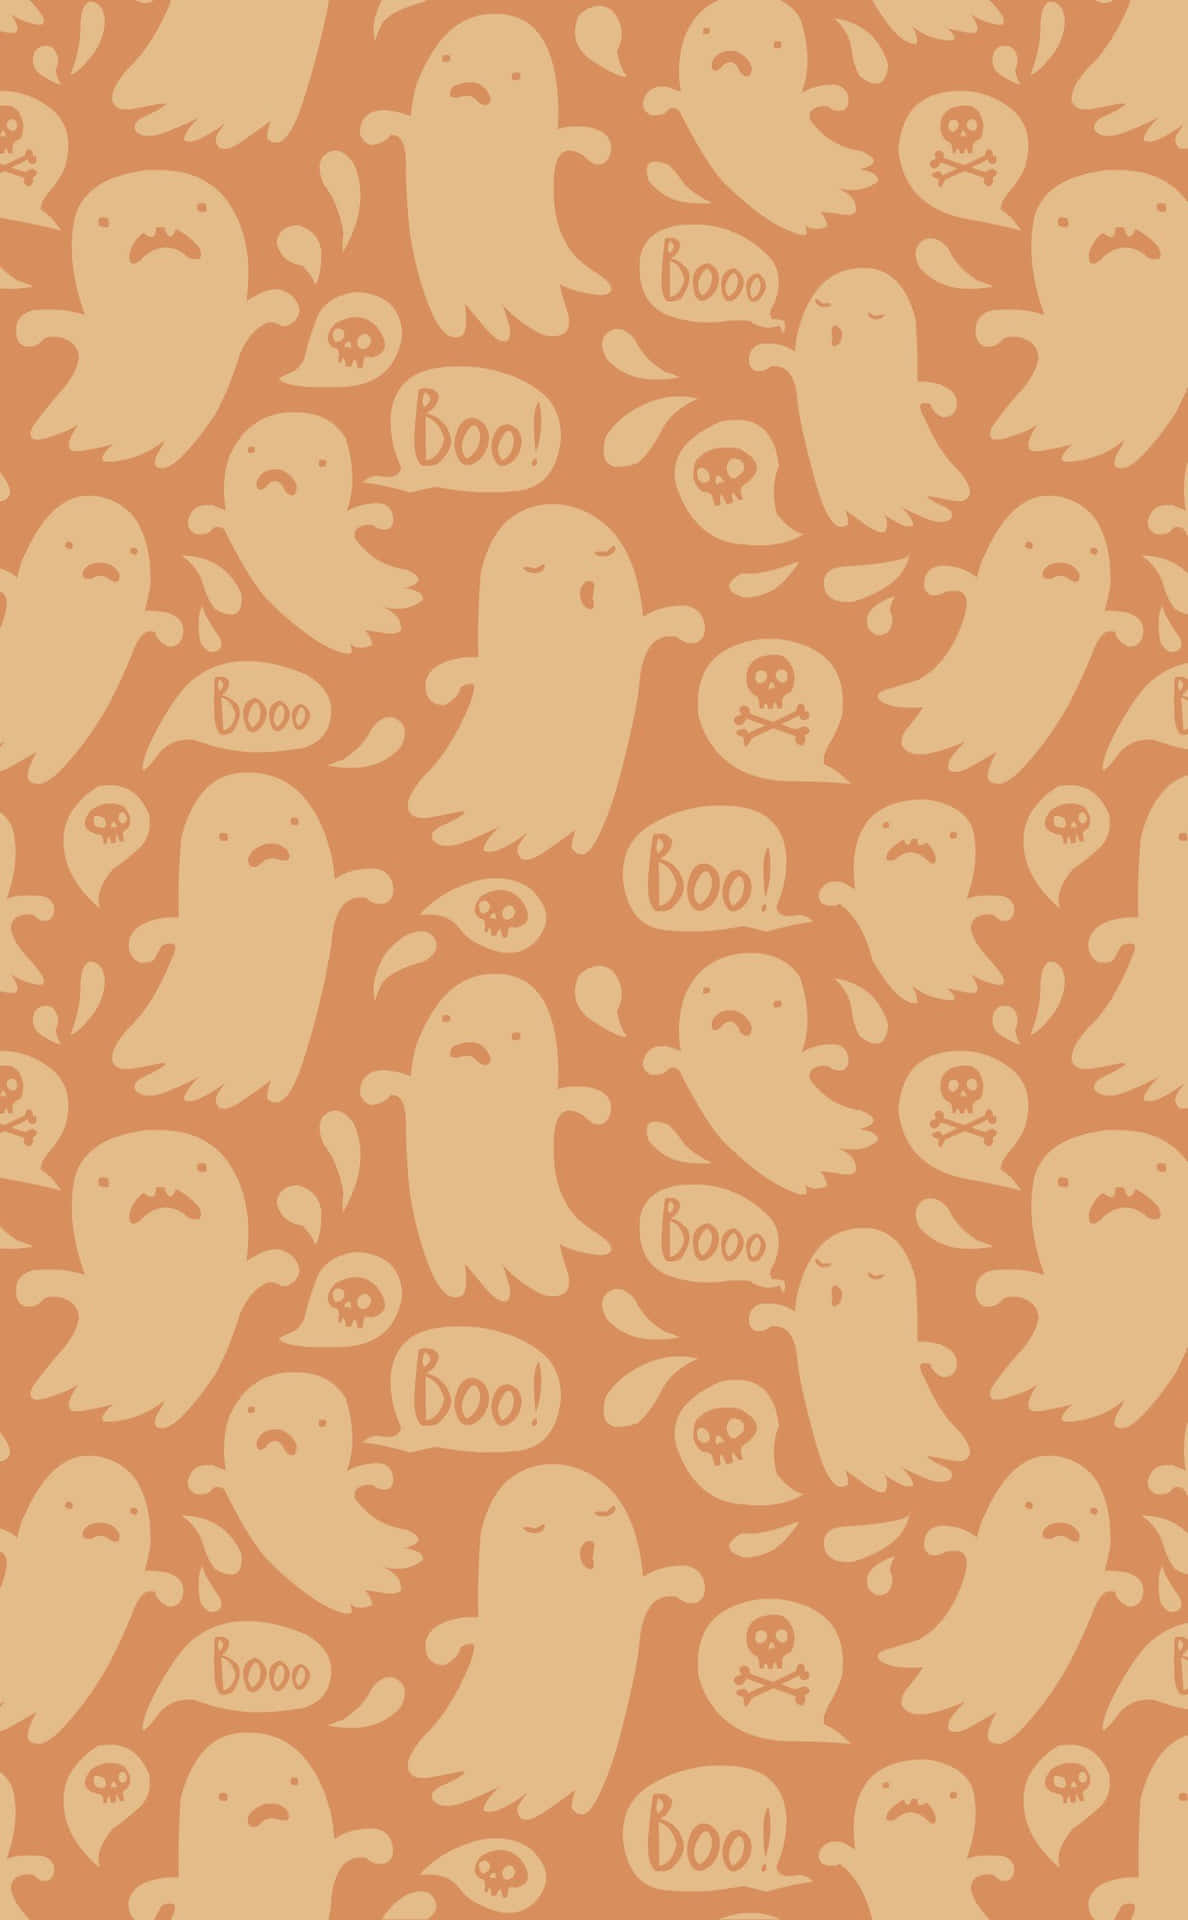 “Ready for a spooky adventure?” Wallpaper